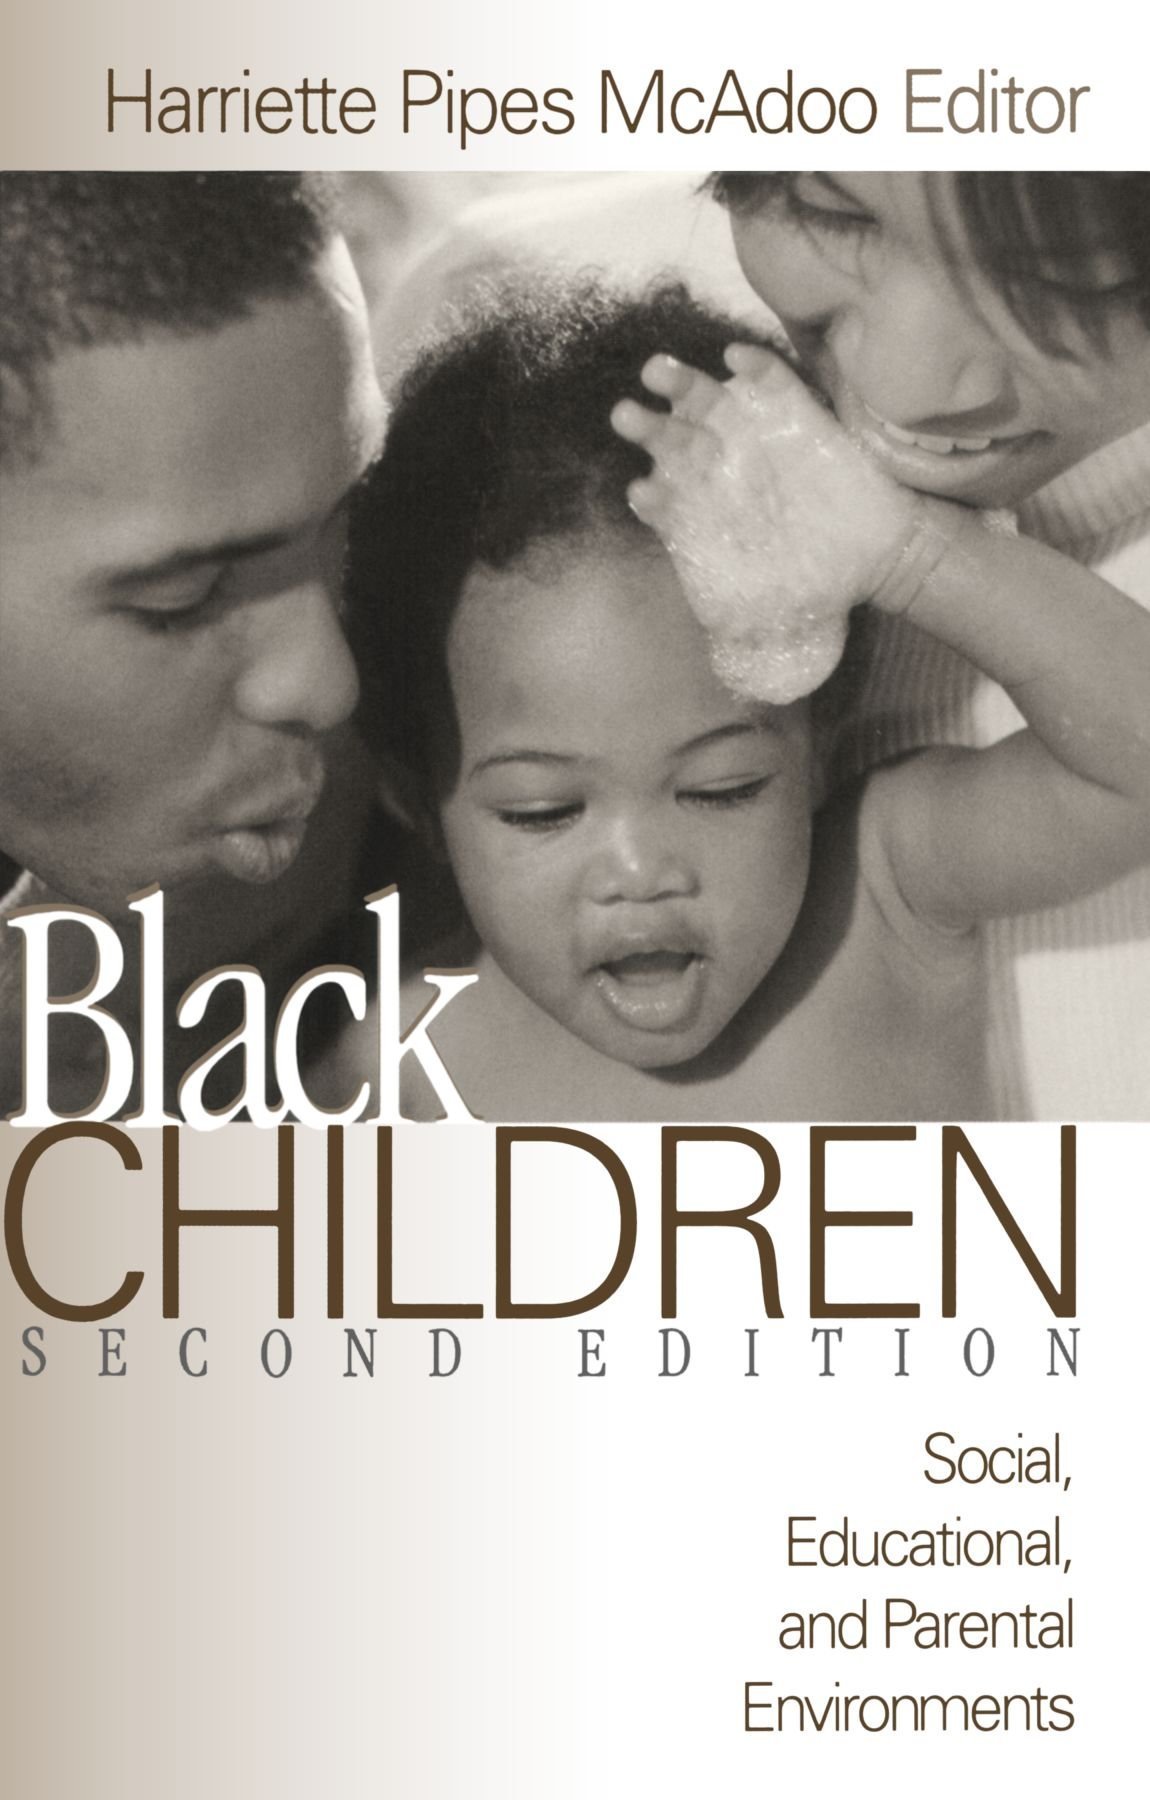 Black Children: Social, Educational, and Parental Environments 2nd Edition